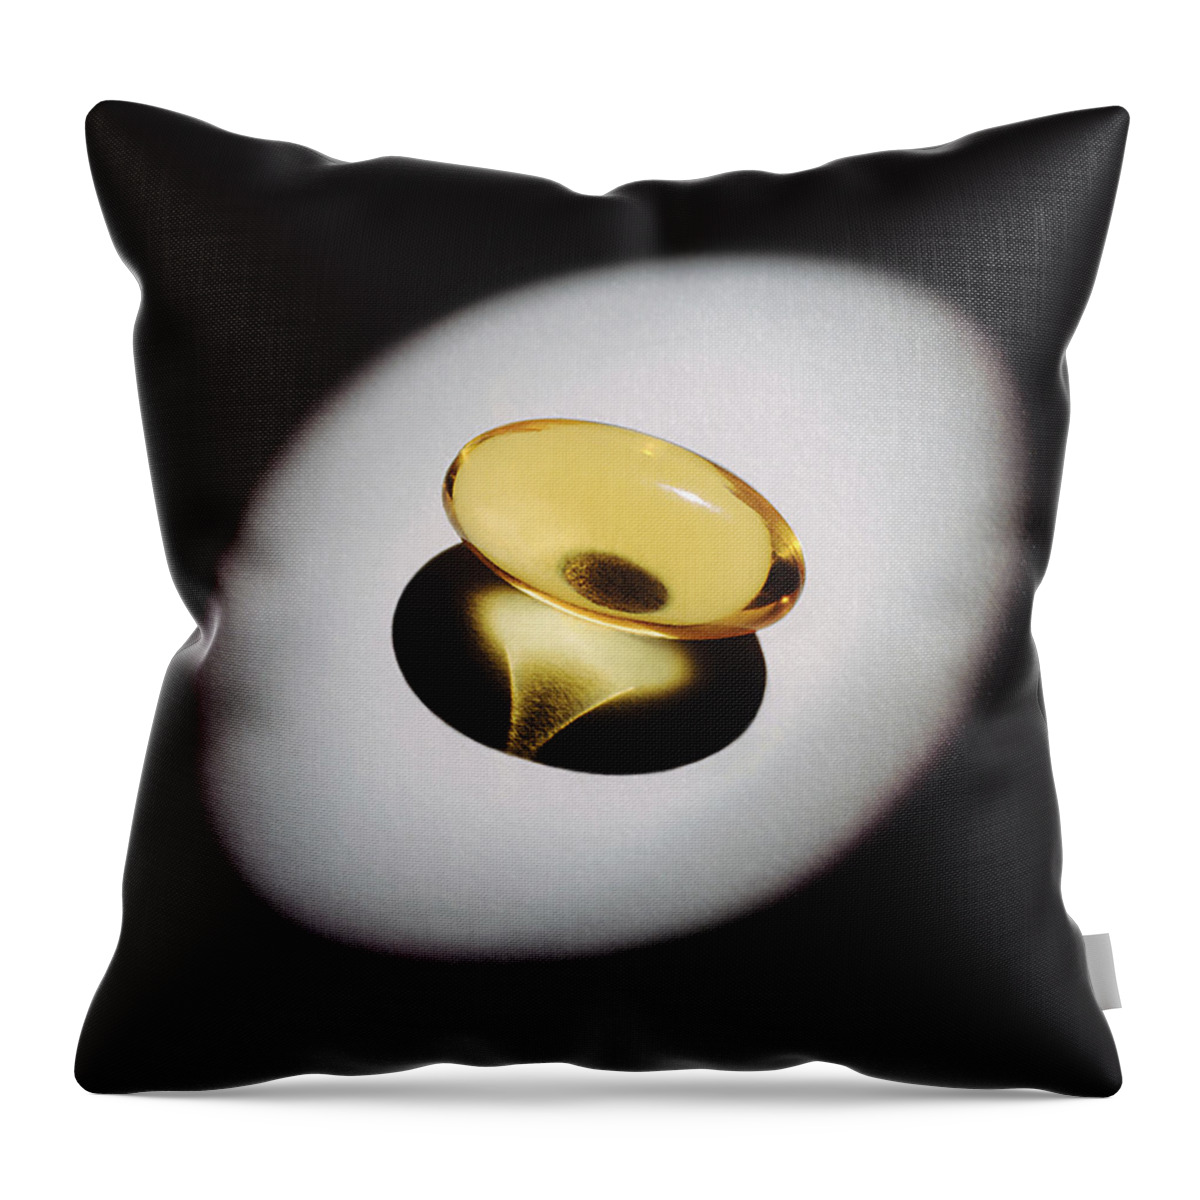 Soft Gel Print Throw Pillow featuring the photograph Softgel by Dolores Kaufman